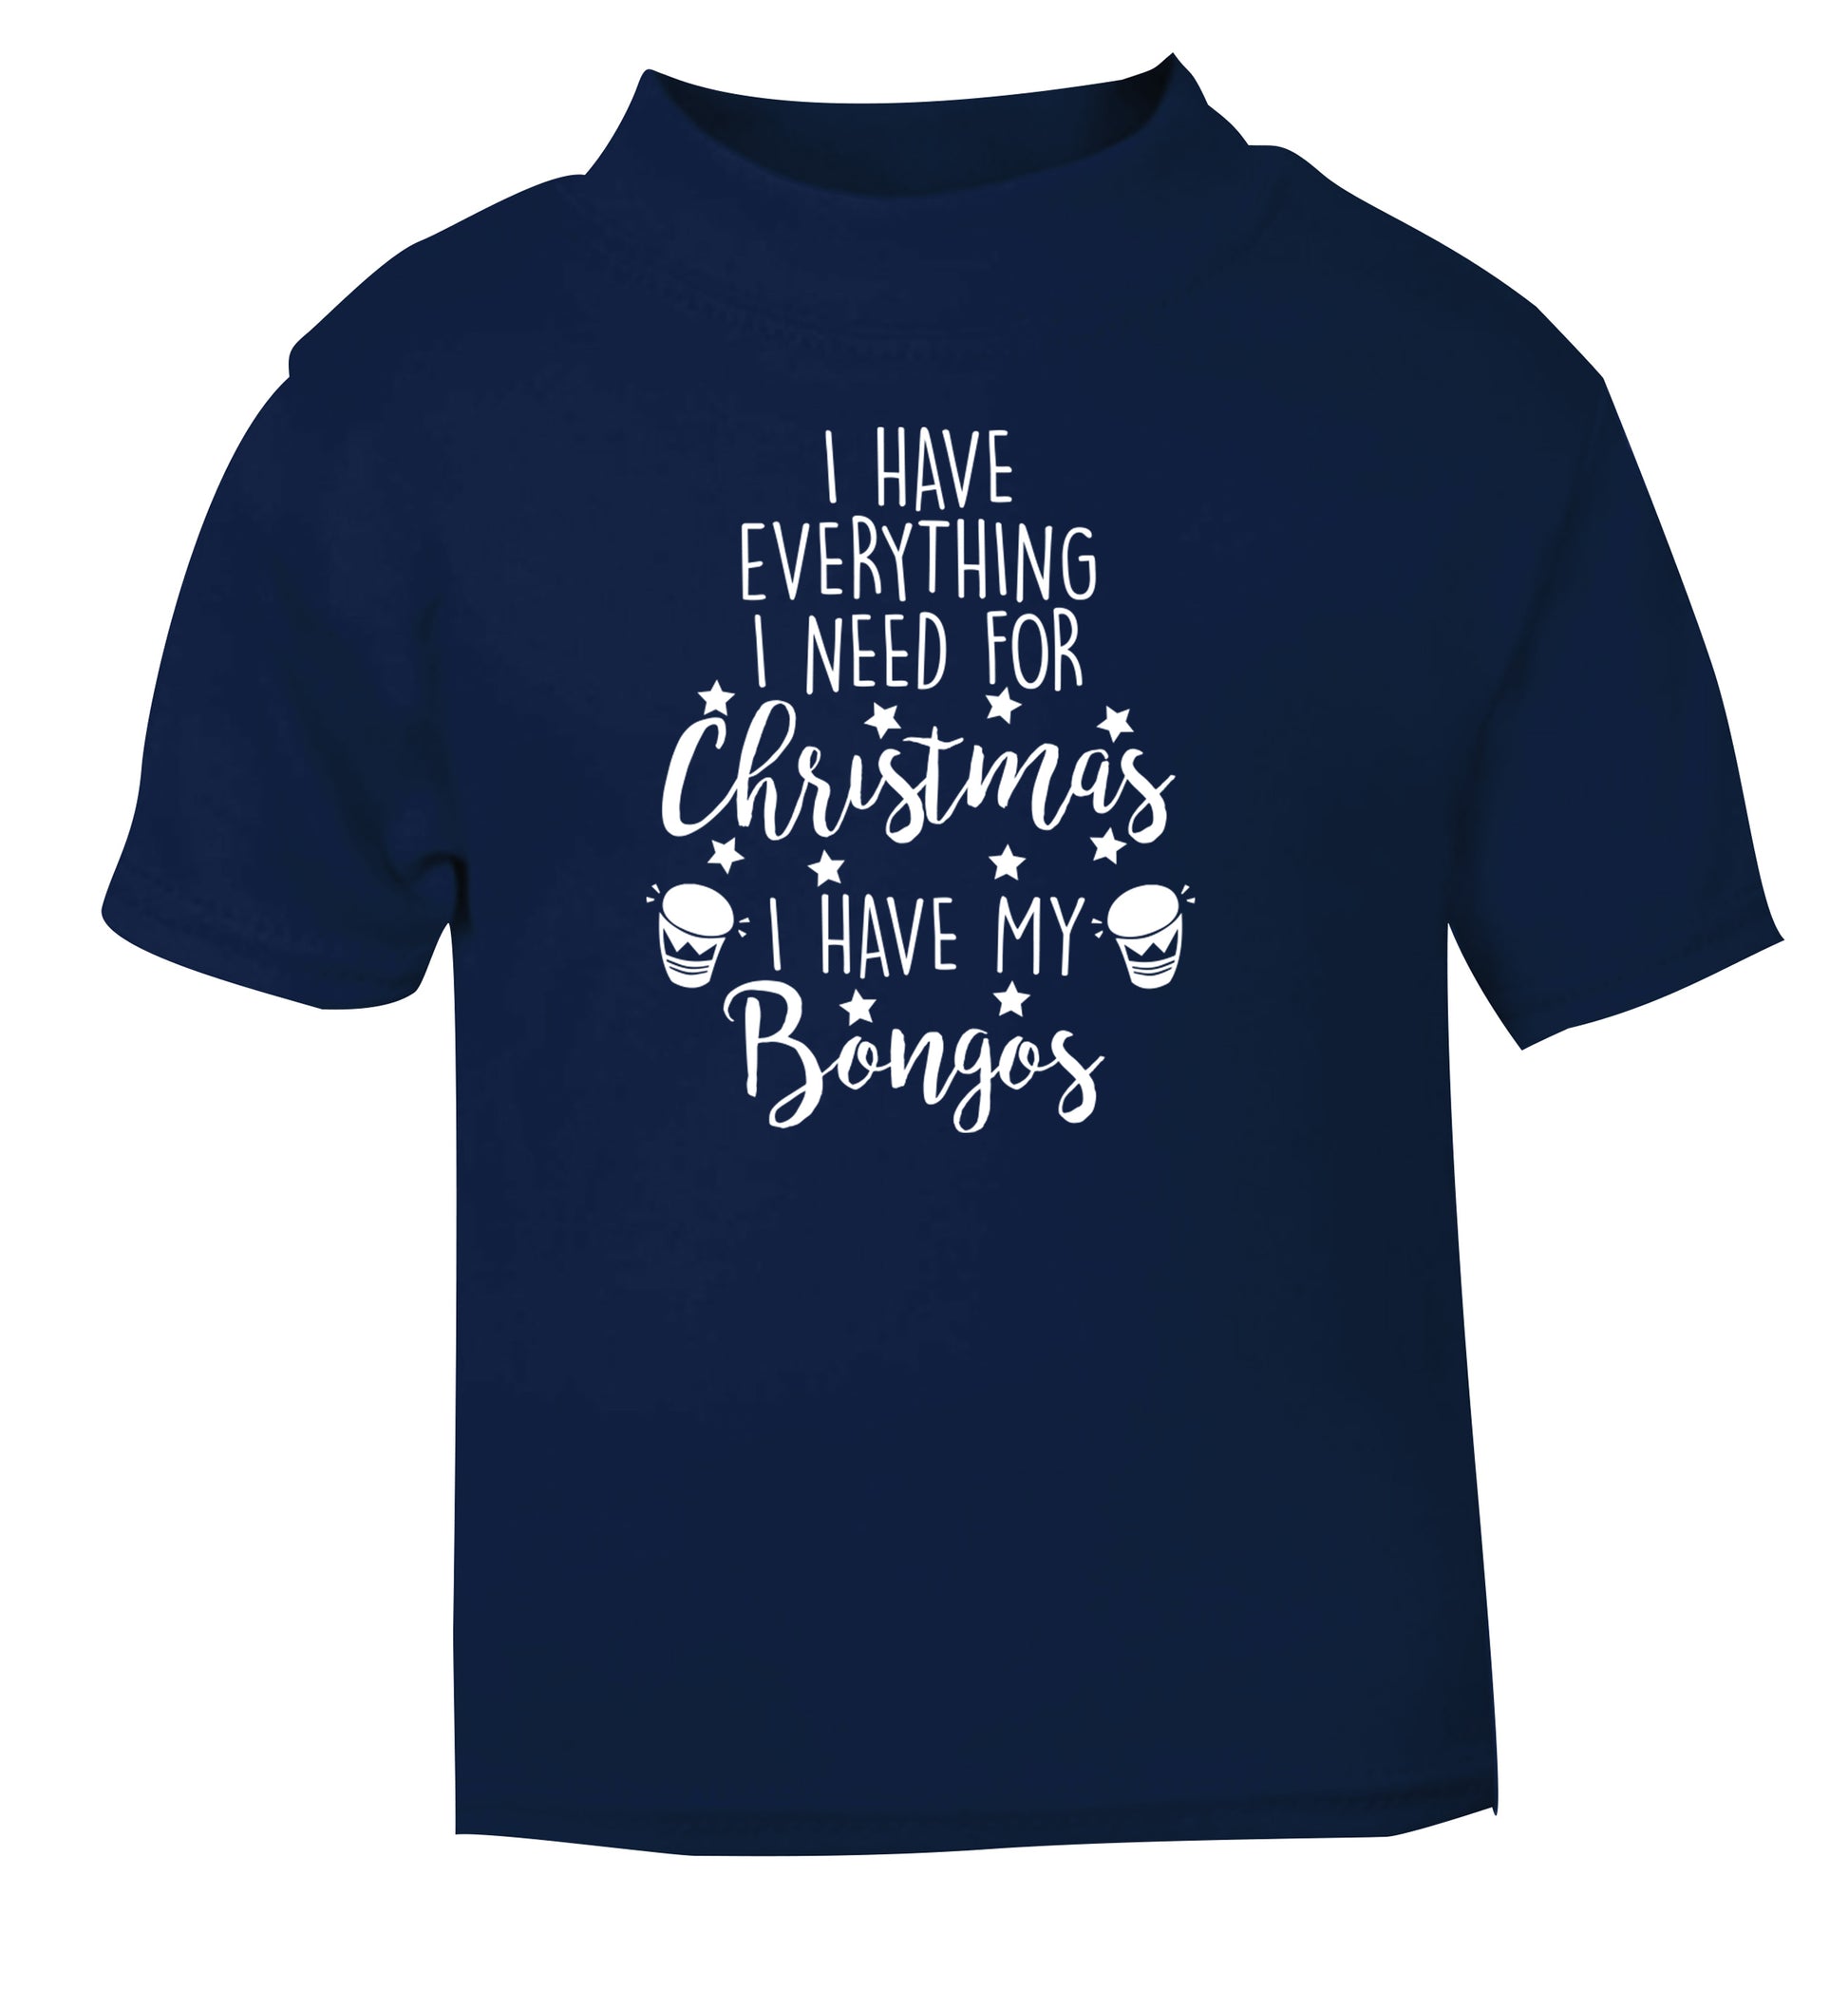 I have everything I need for Christmas I have my bongos! navy Baby Toddler Tshirt 2 Years